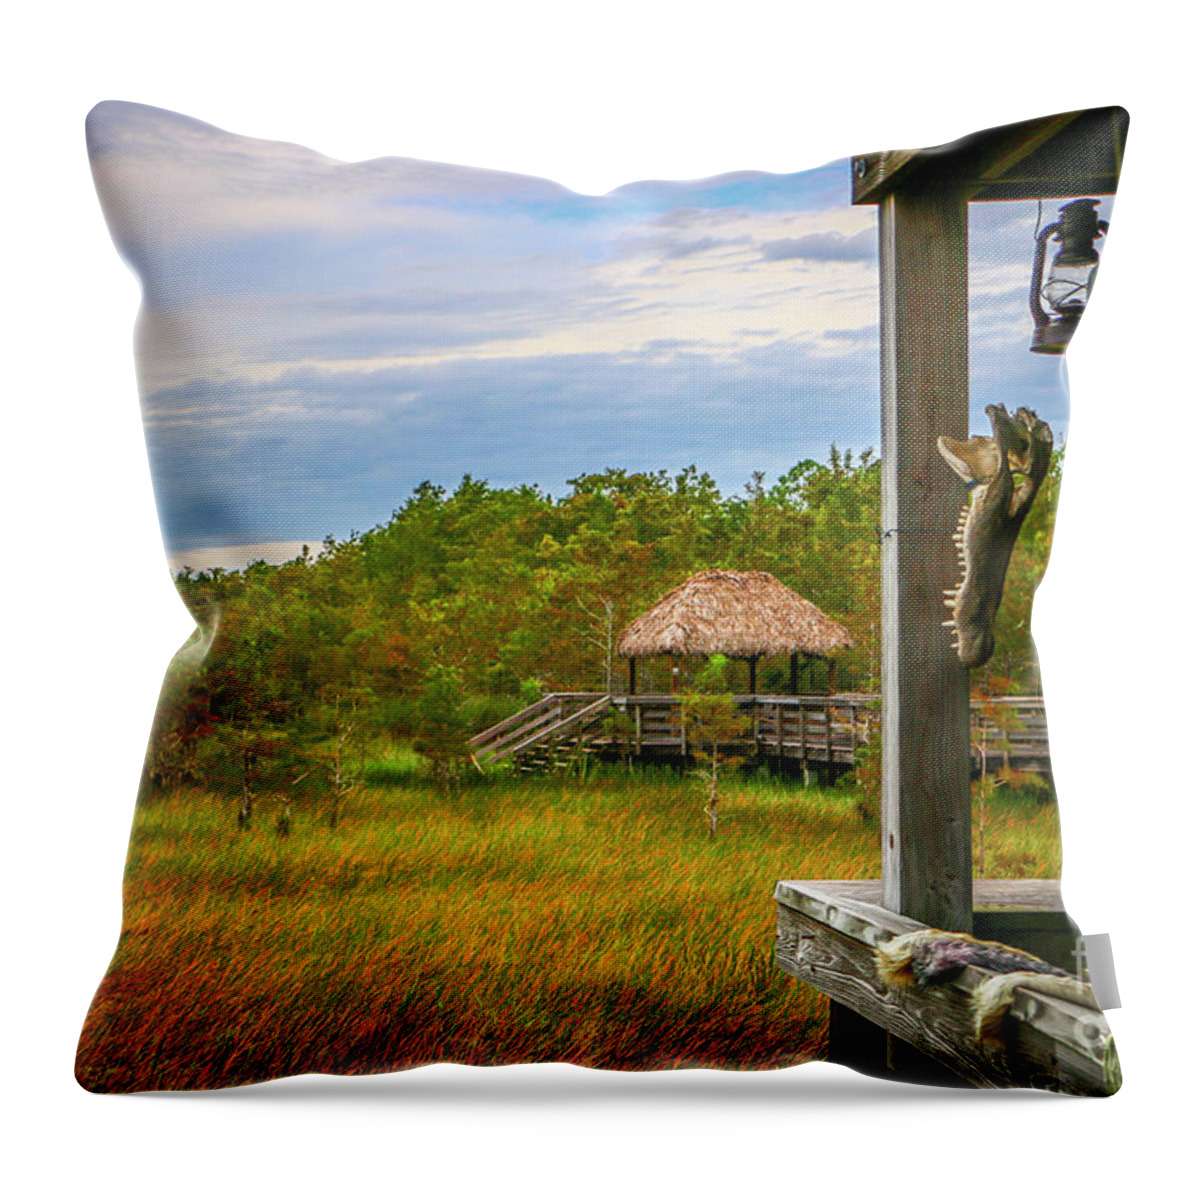 Tiki Throw Pillow featuring the photograph Tiki Hut View by Tom Claud